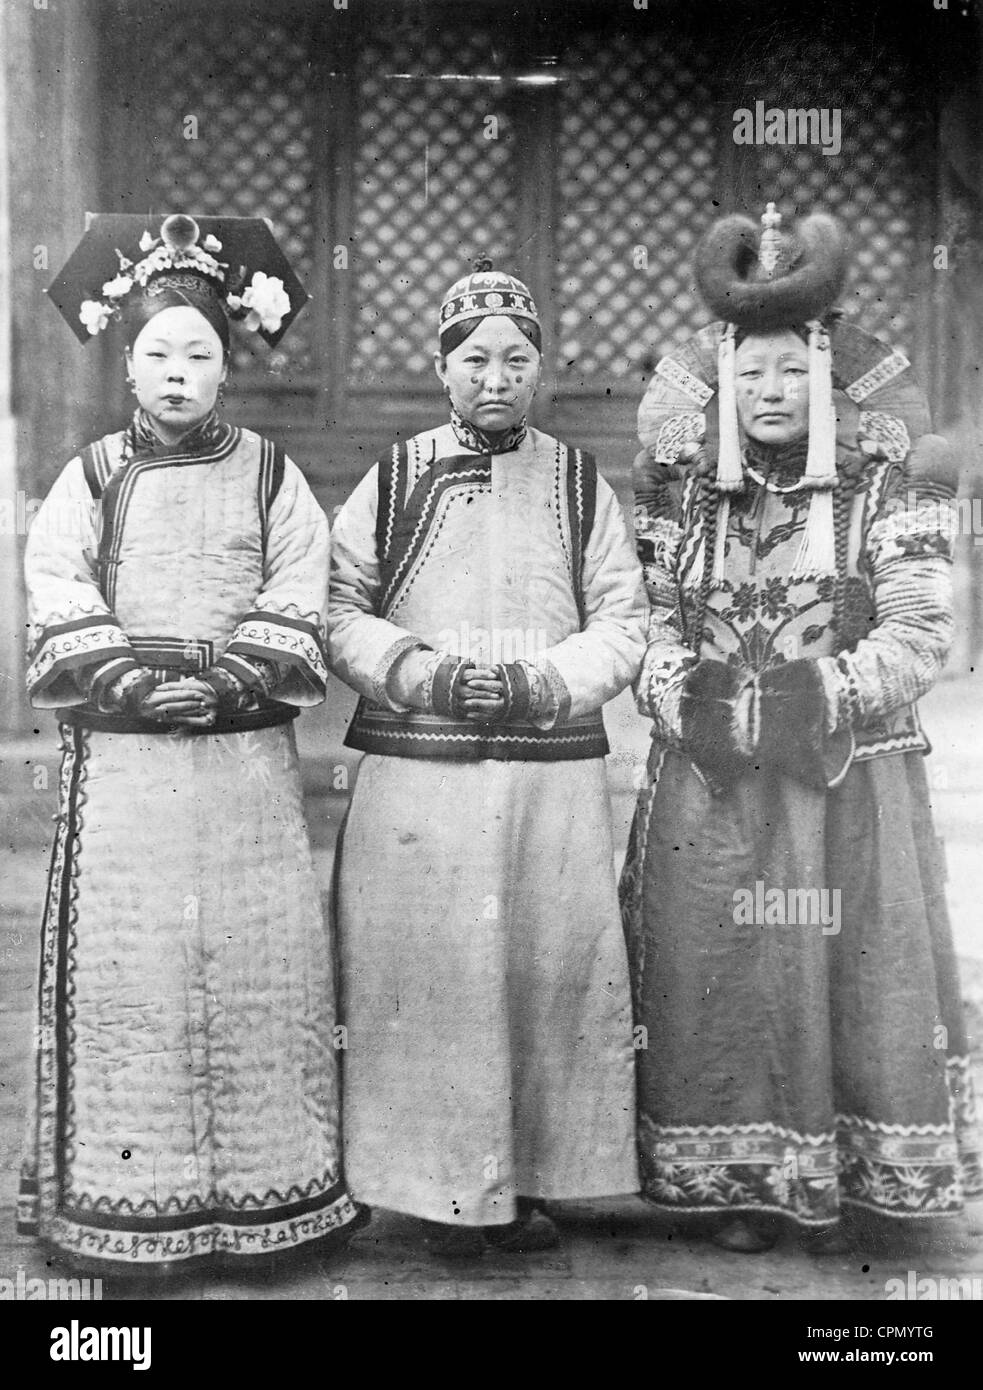 Traditional chinese dress Black and White Stock Photos & Images - Alamy